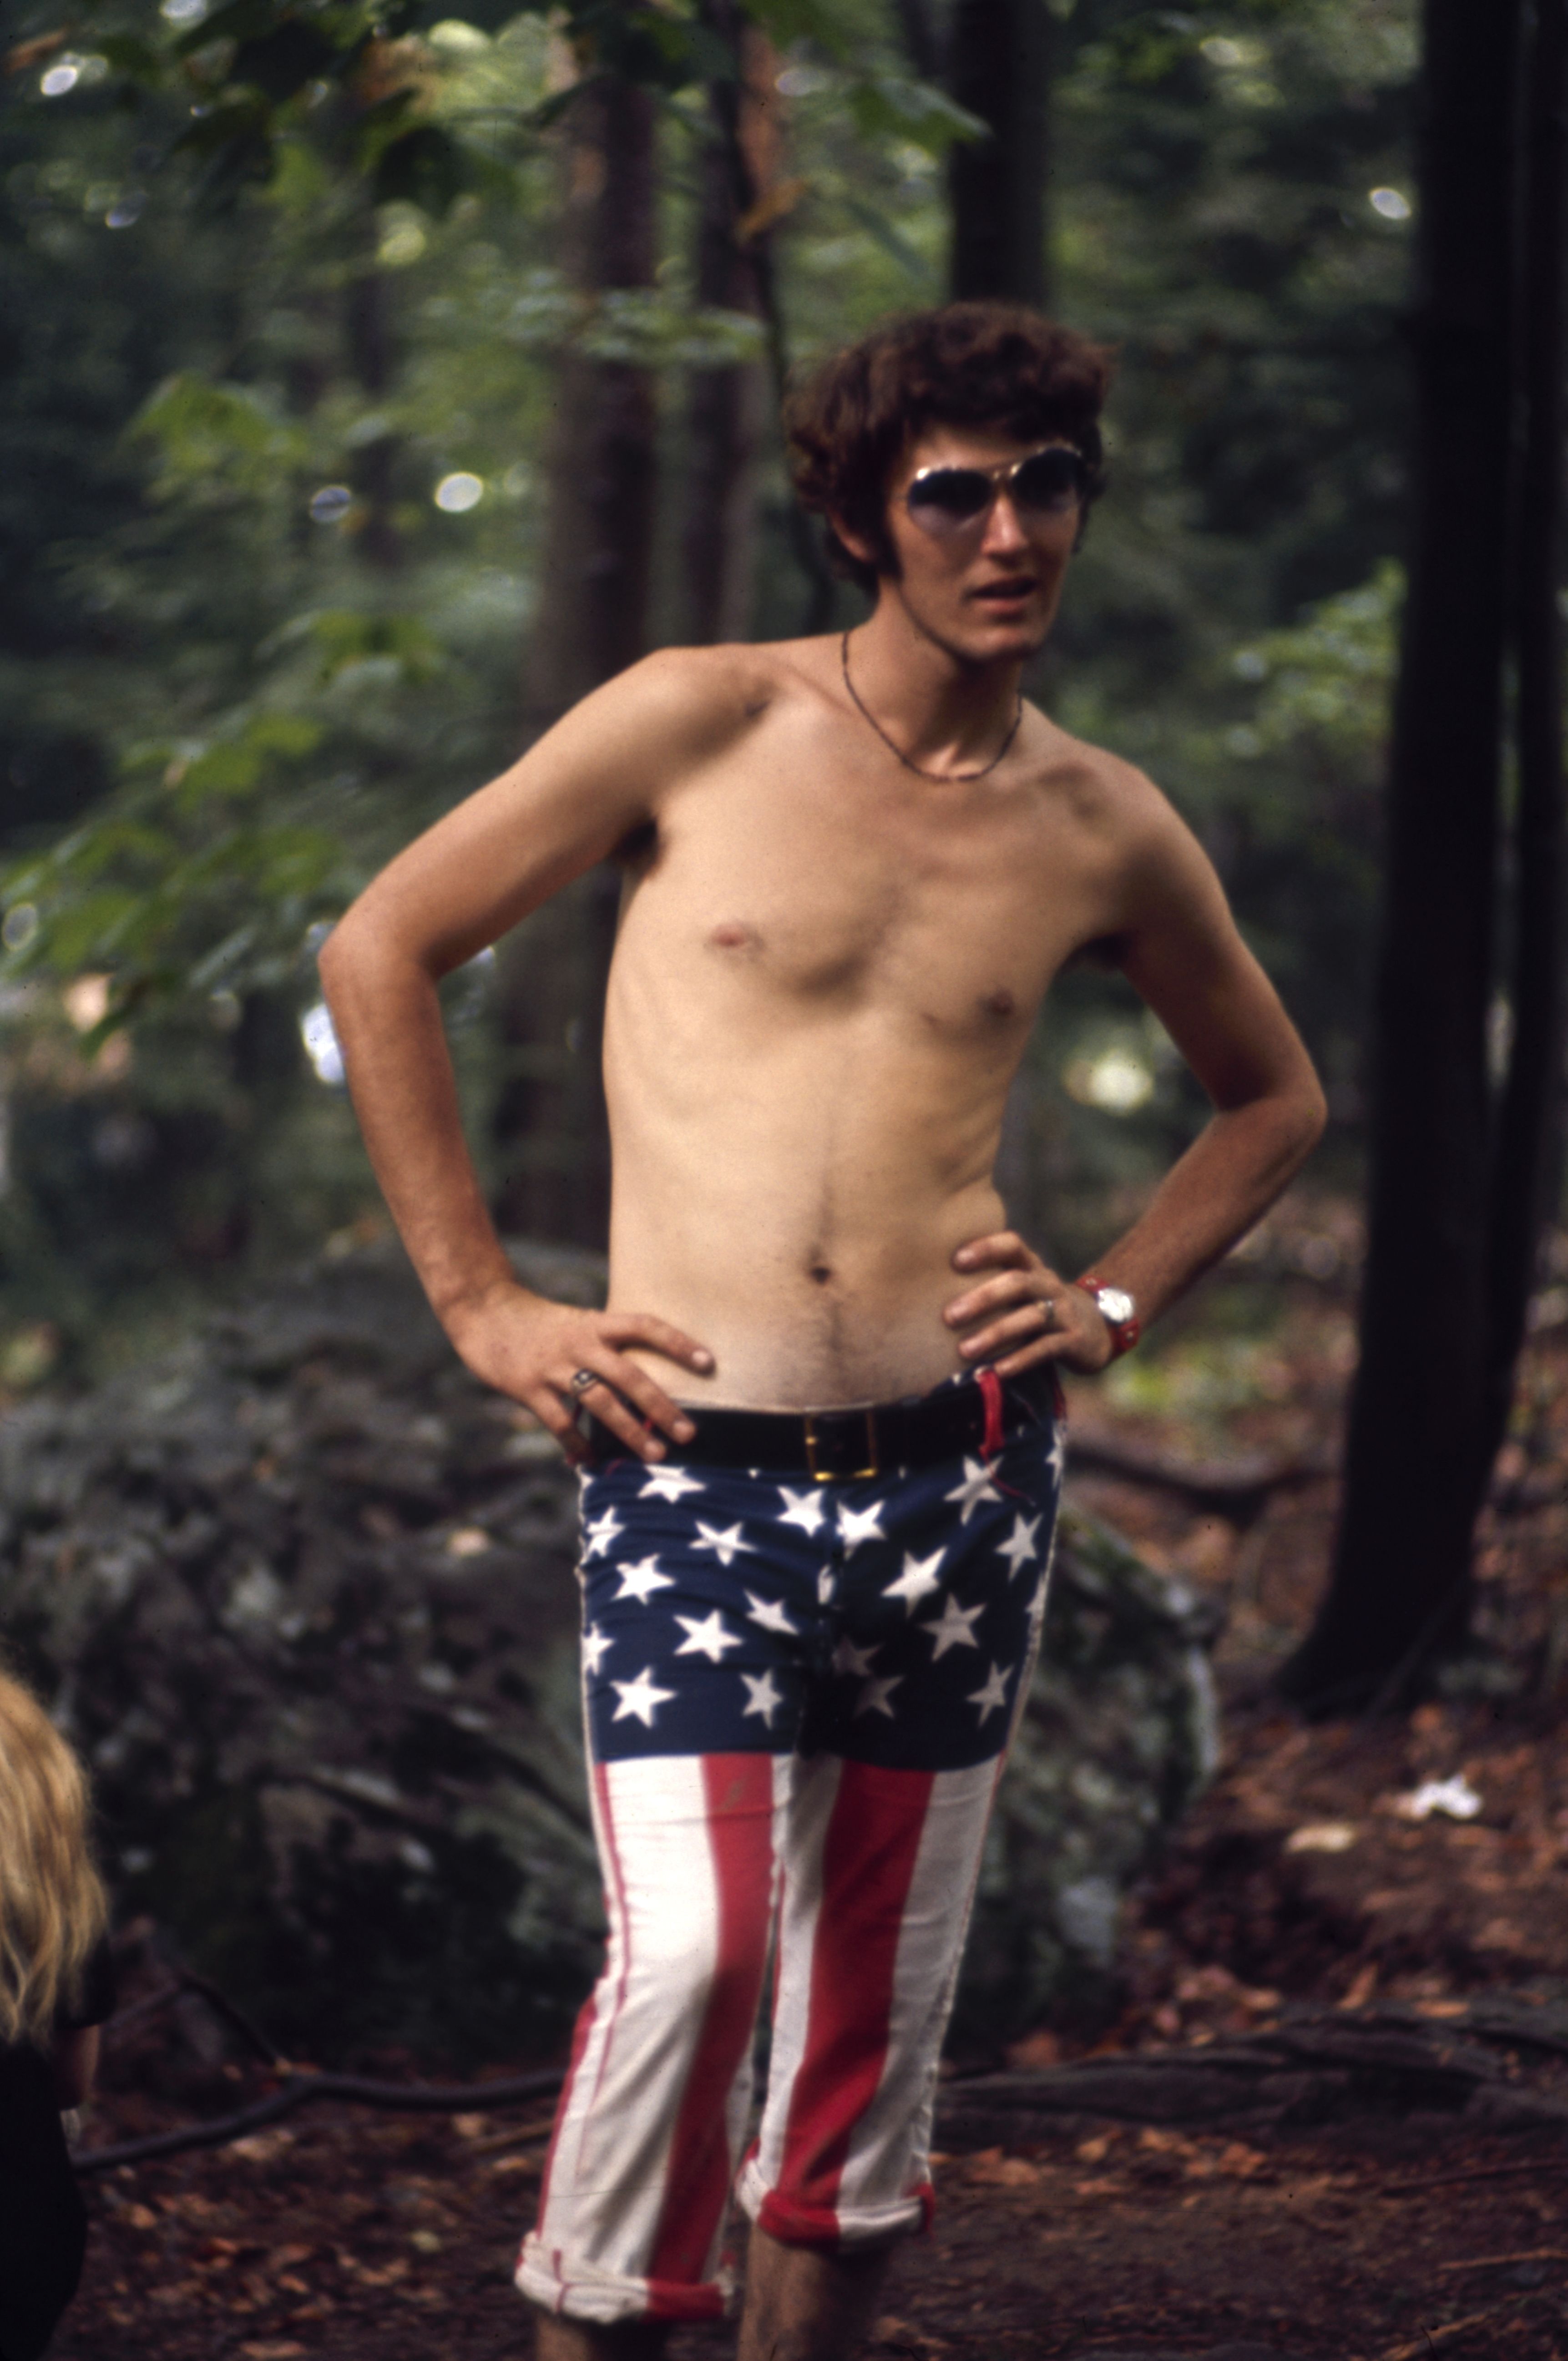 18 Worst Fashion Trends From the 1960s - Style Mistakes of the '60s